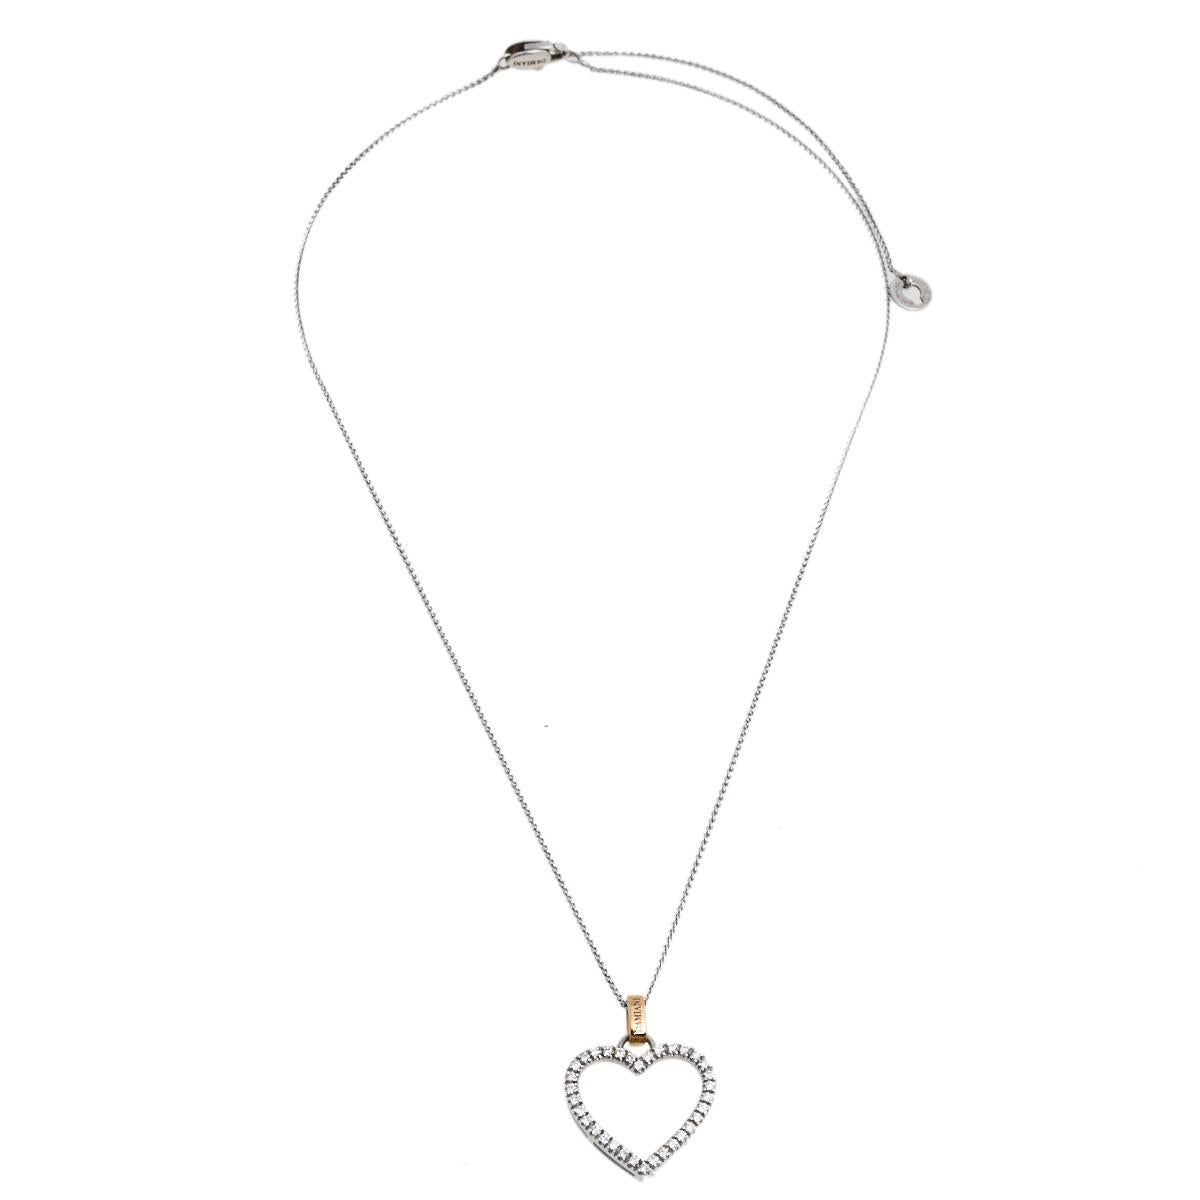 This necklace from Damiani exemplifies minimal style with modern aesthetics. It is made from 18k white gold and the chain holds a gorgeous heart-shaped pendant decorated with diamonds. The bail is rendered in yellow gold and is engraved with the